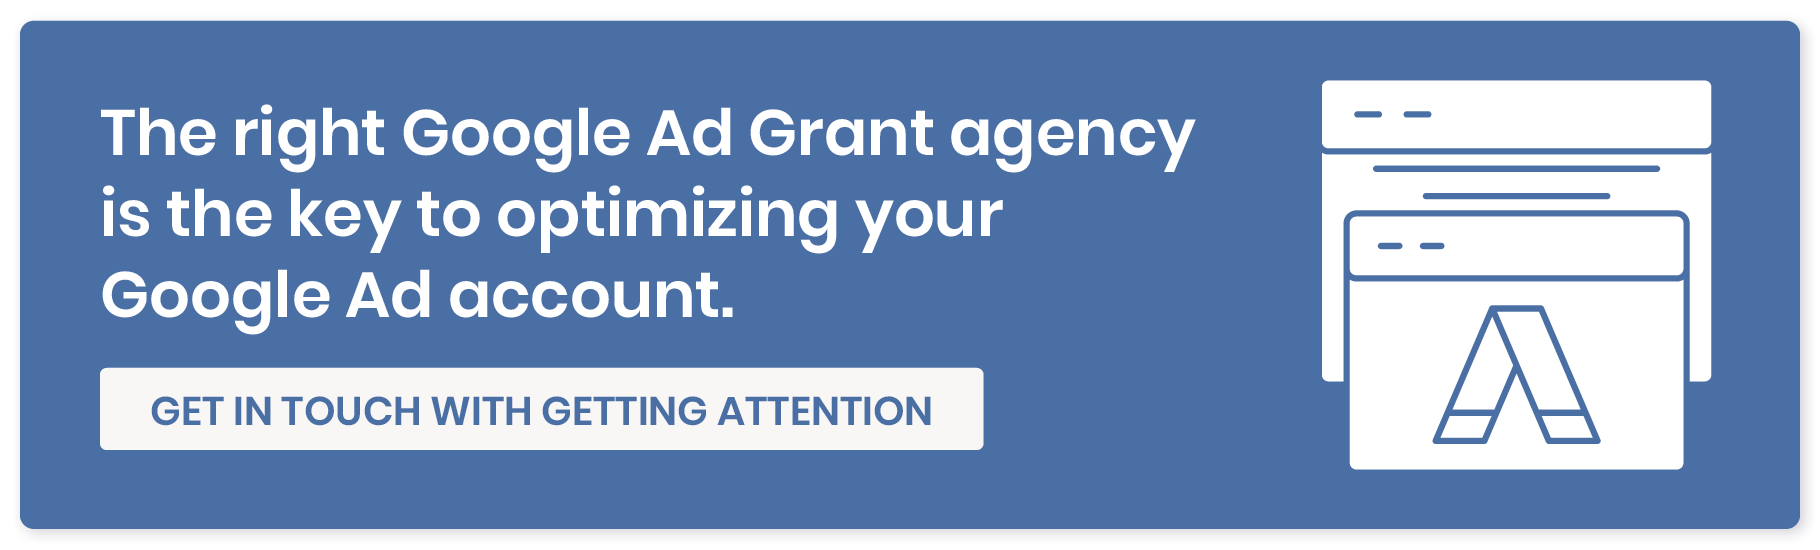 The right Google Ad Grant agency is the key to optimizing your Google Ad account. Get in touch with Getting Attention.